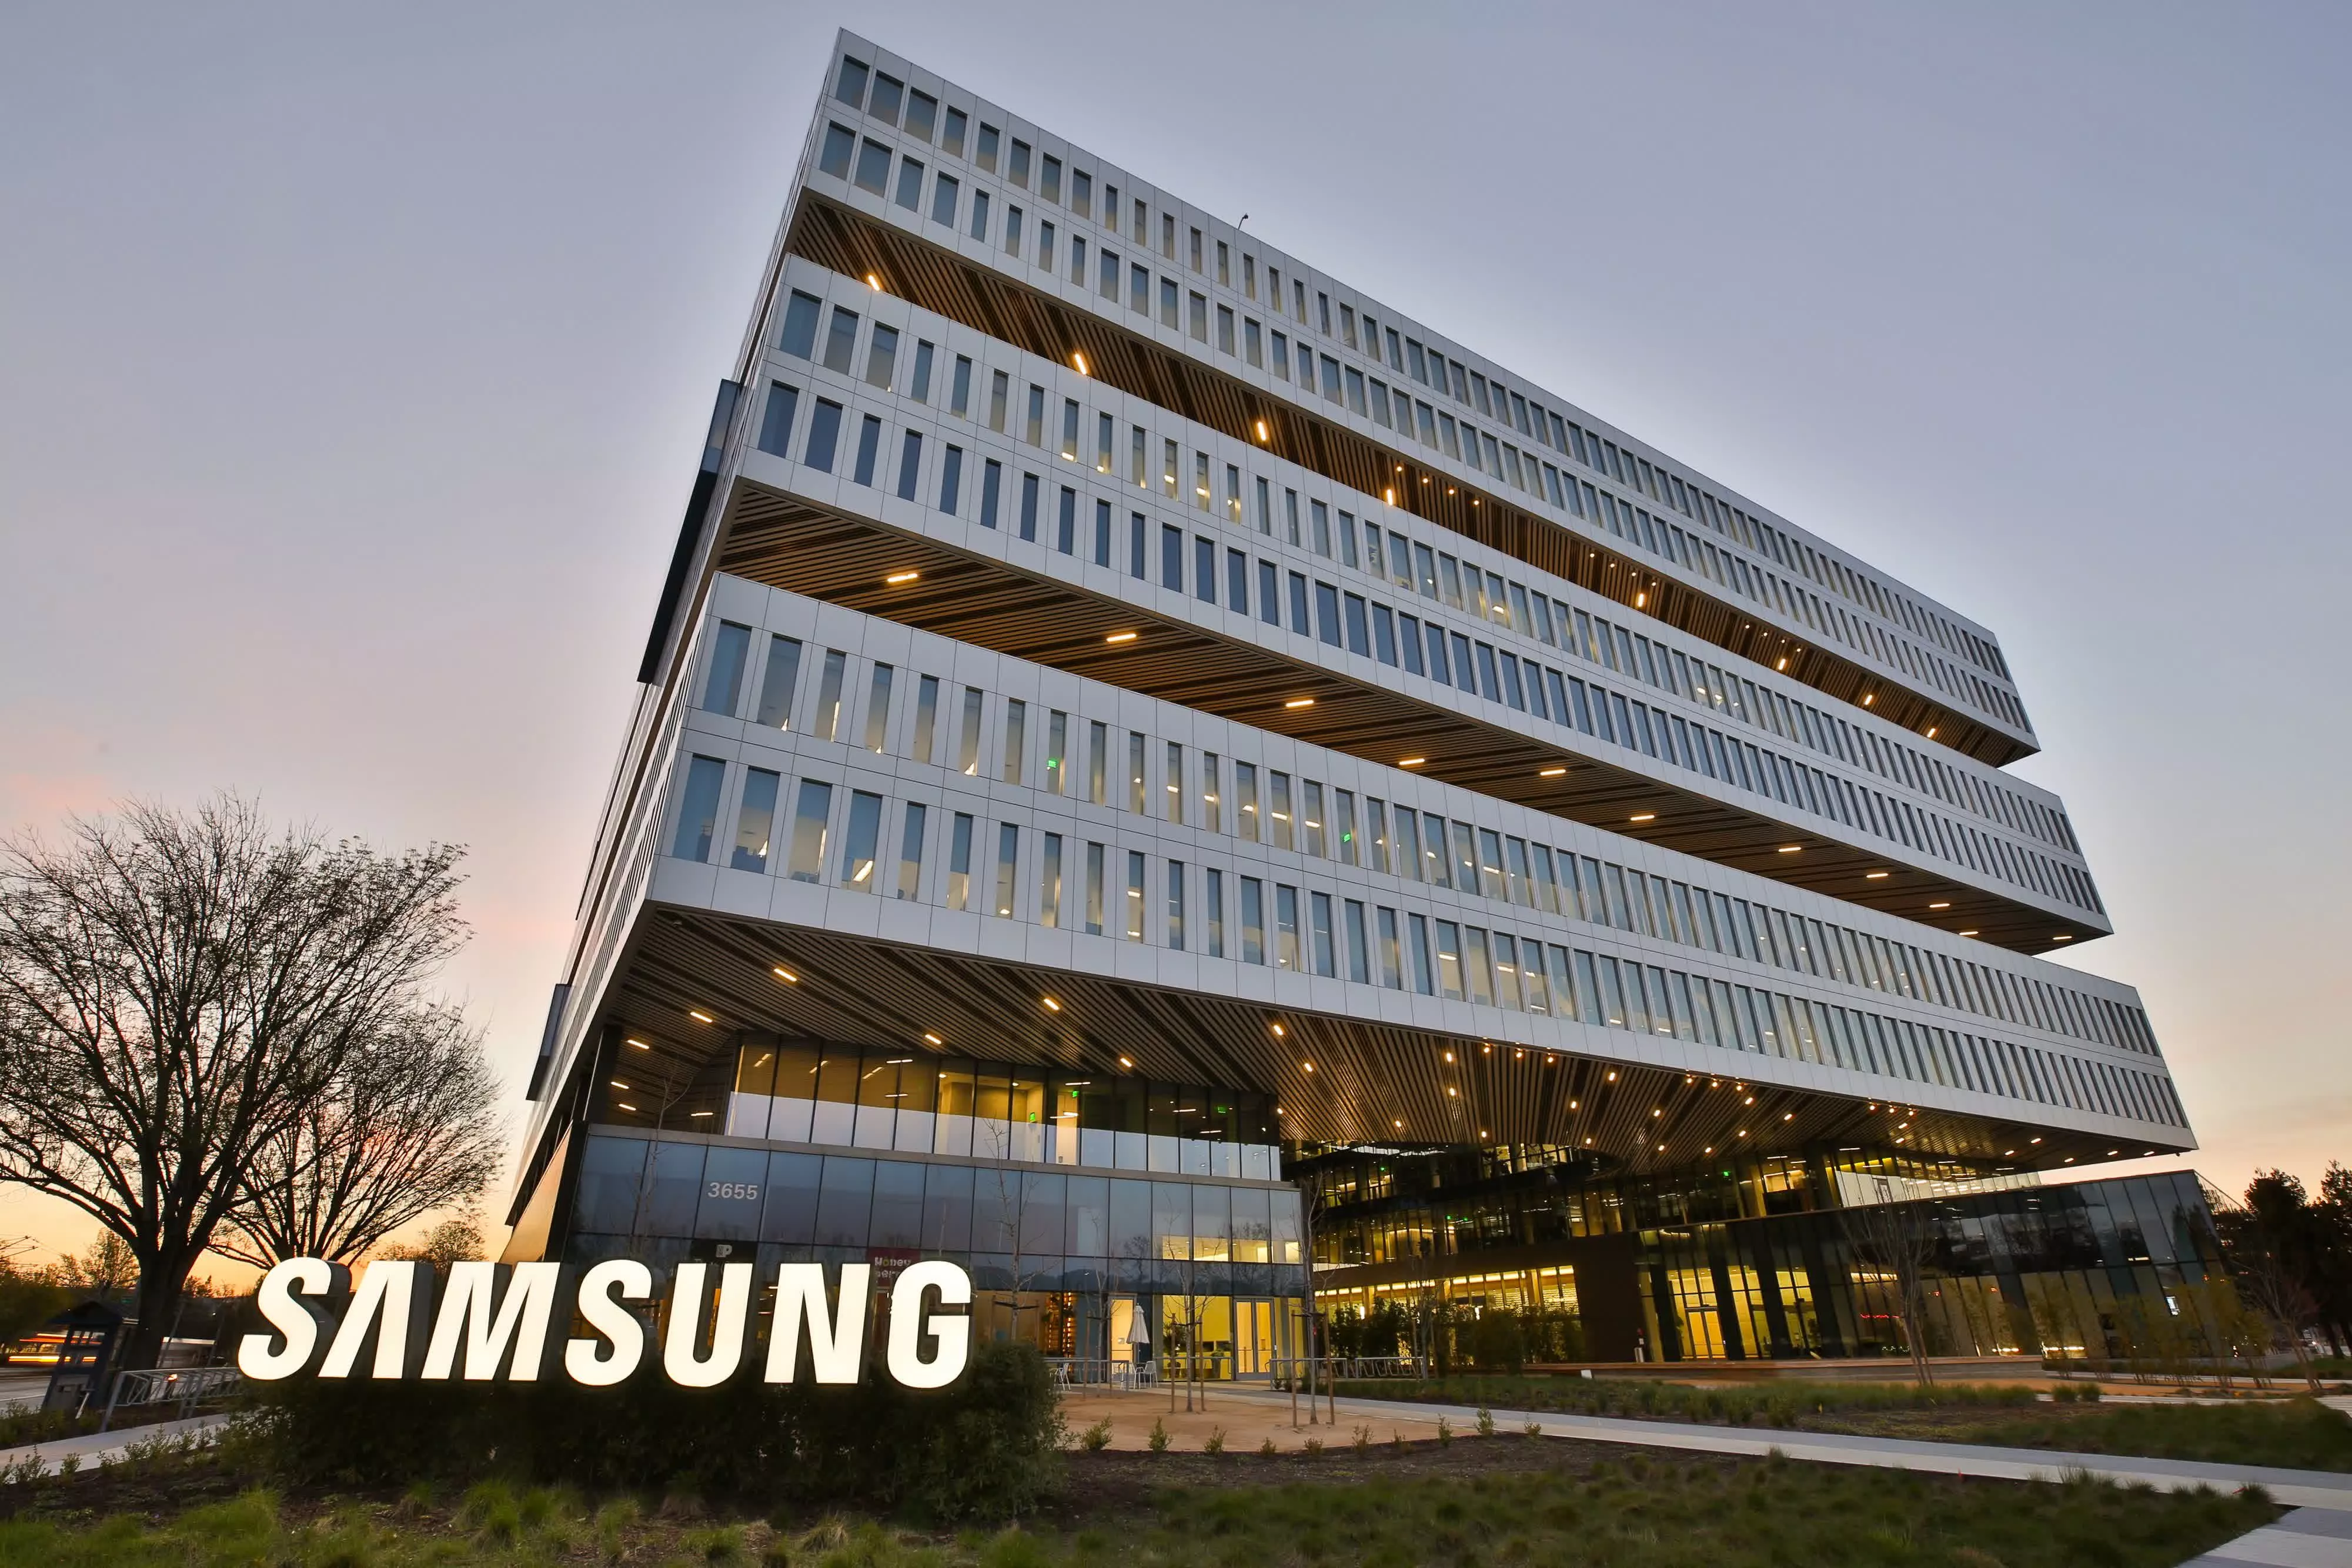 Samsung will manufacture 3nm chips for Nvidia, Baidu, Qualcomm and IBM